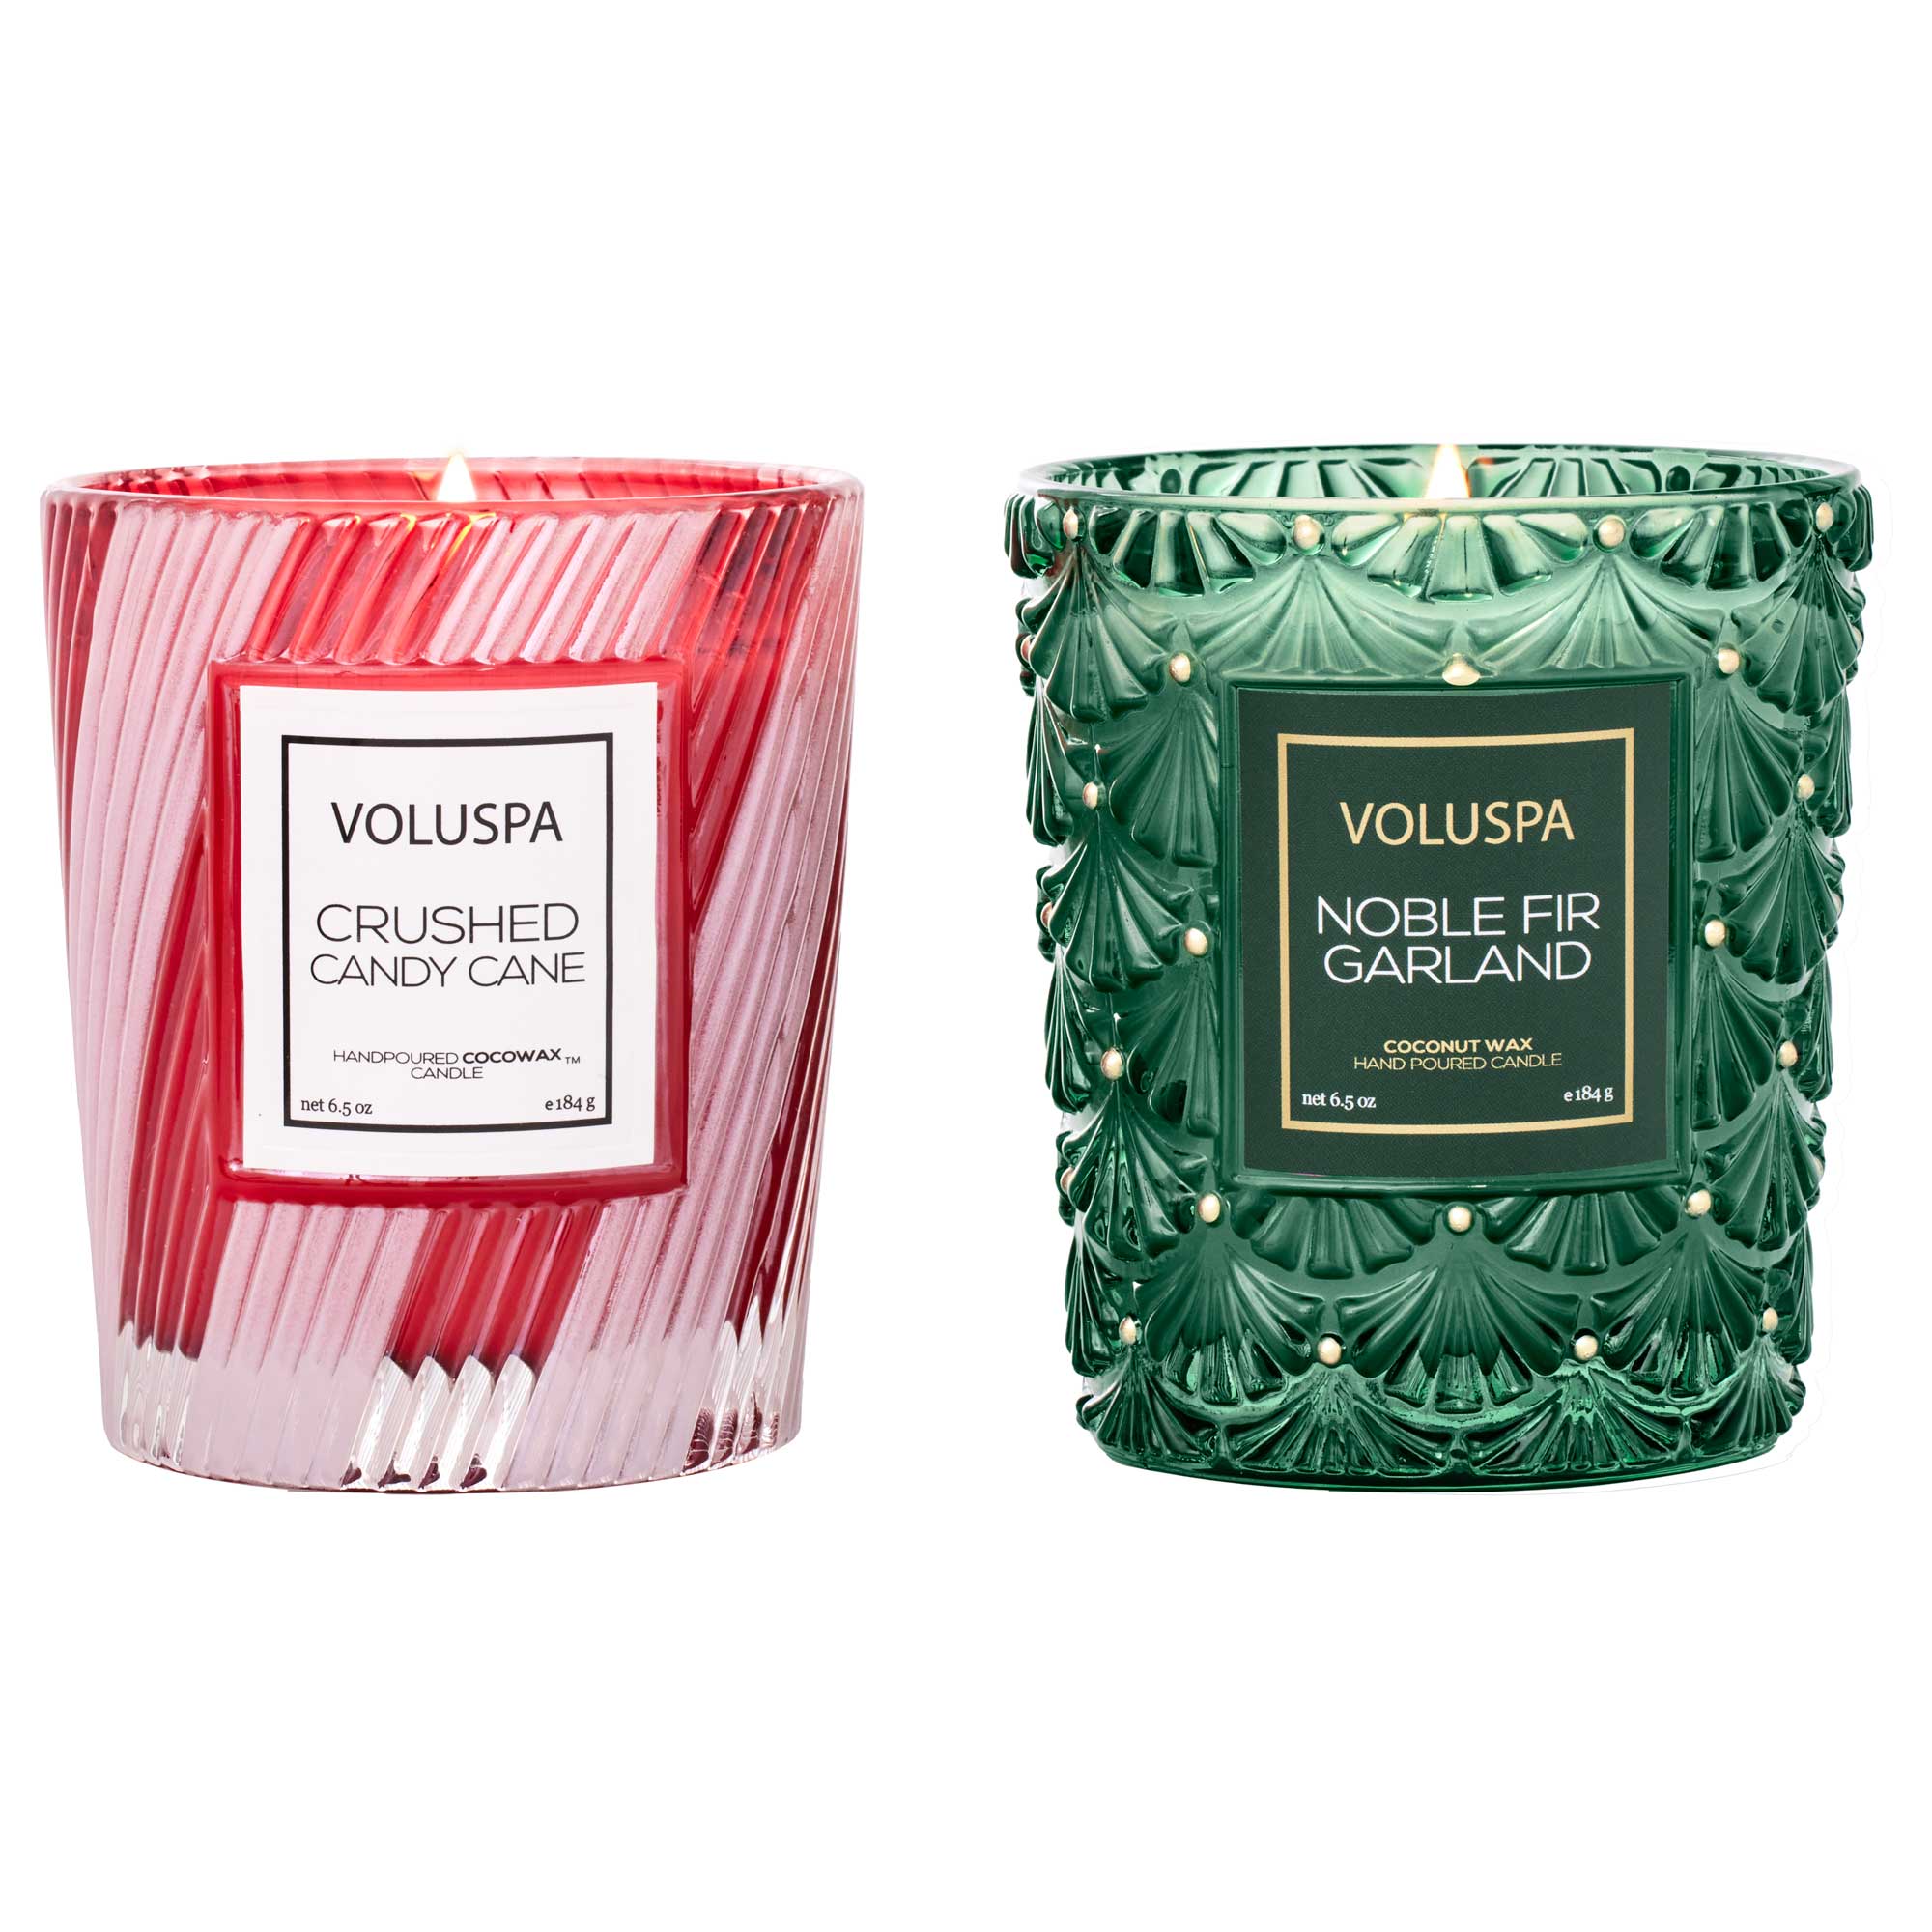 Light Up The Holidays - Classic Candle Gift Set